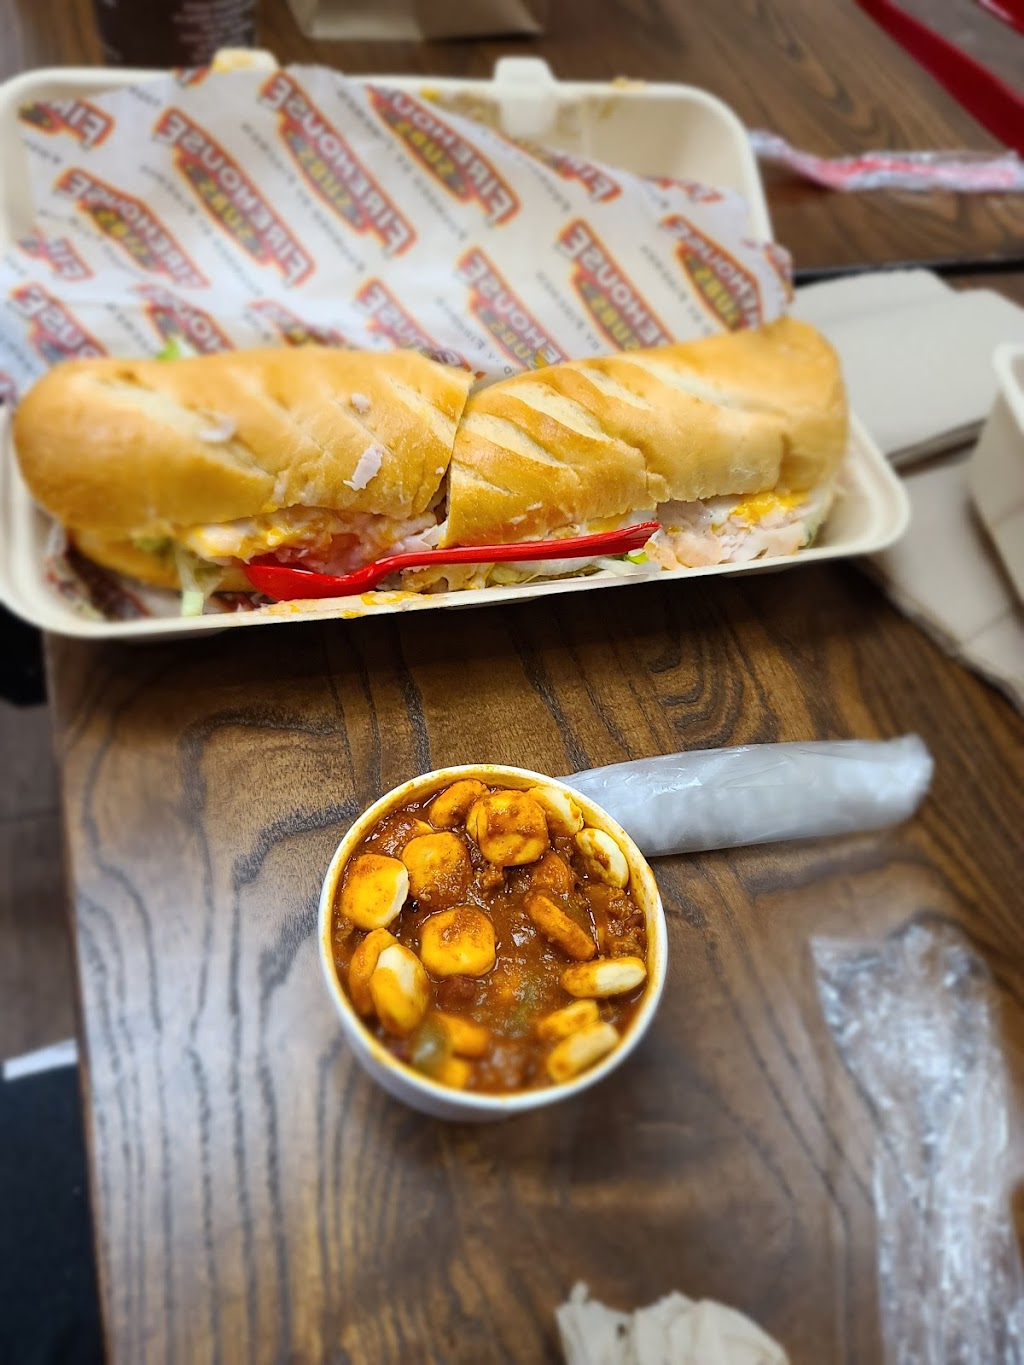 Firehouse Subs Quincy Commons | restaurant | 3720 Broadway St, Quincy, IL 62305, USA | 2172238445 OR +1 217-223-8445